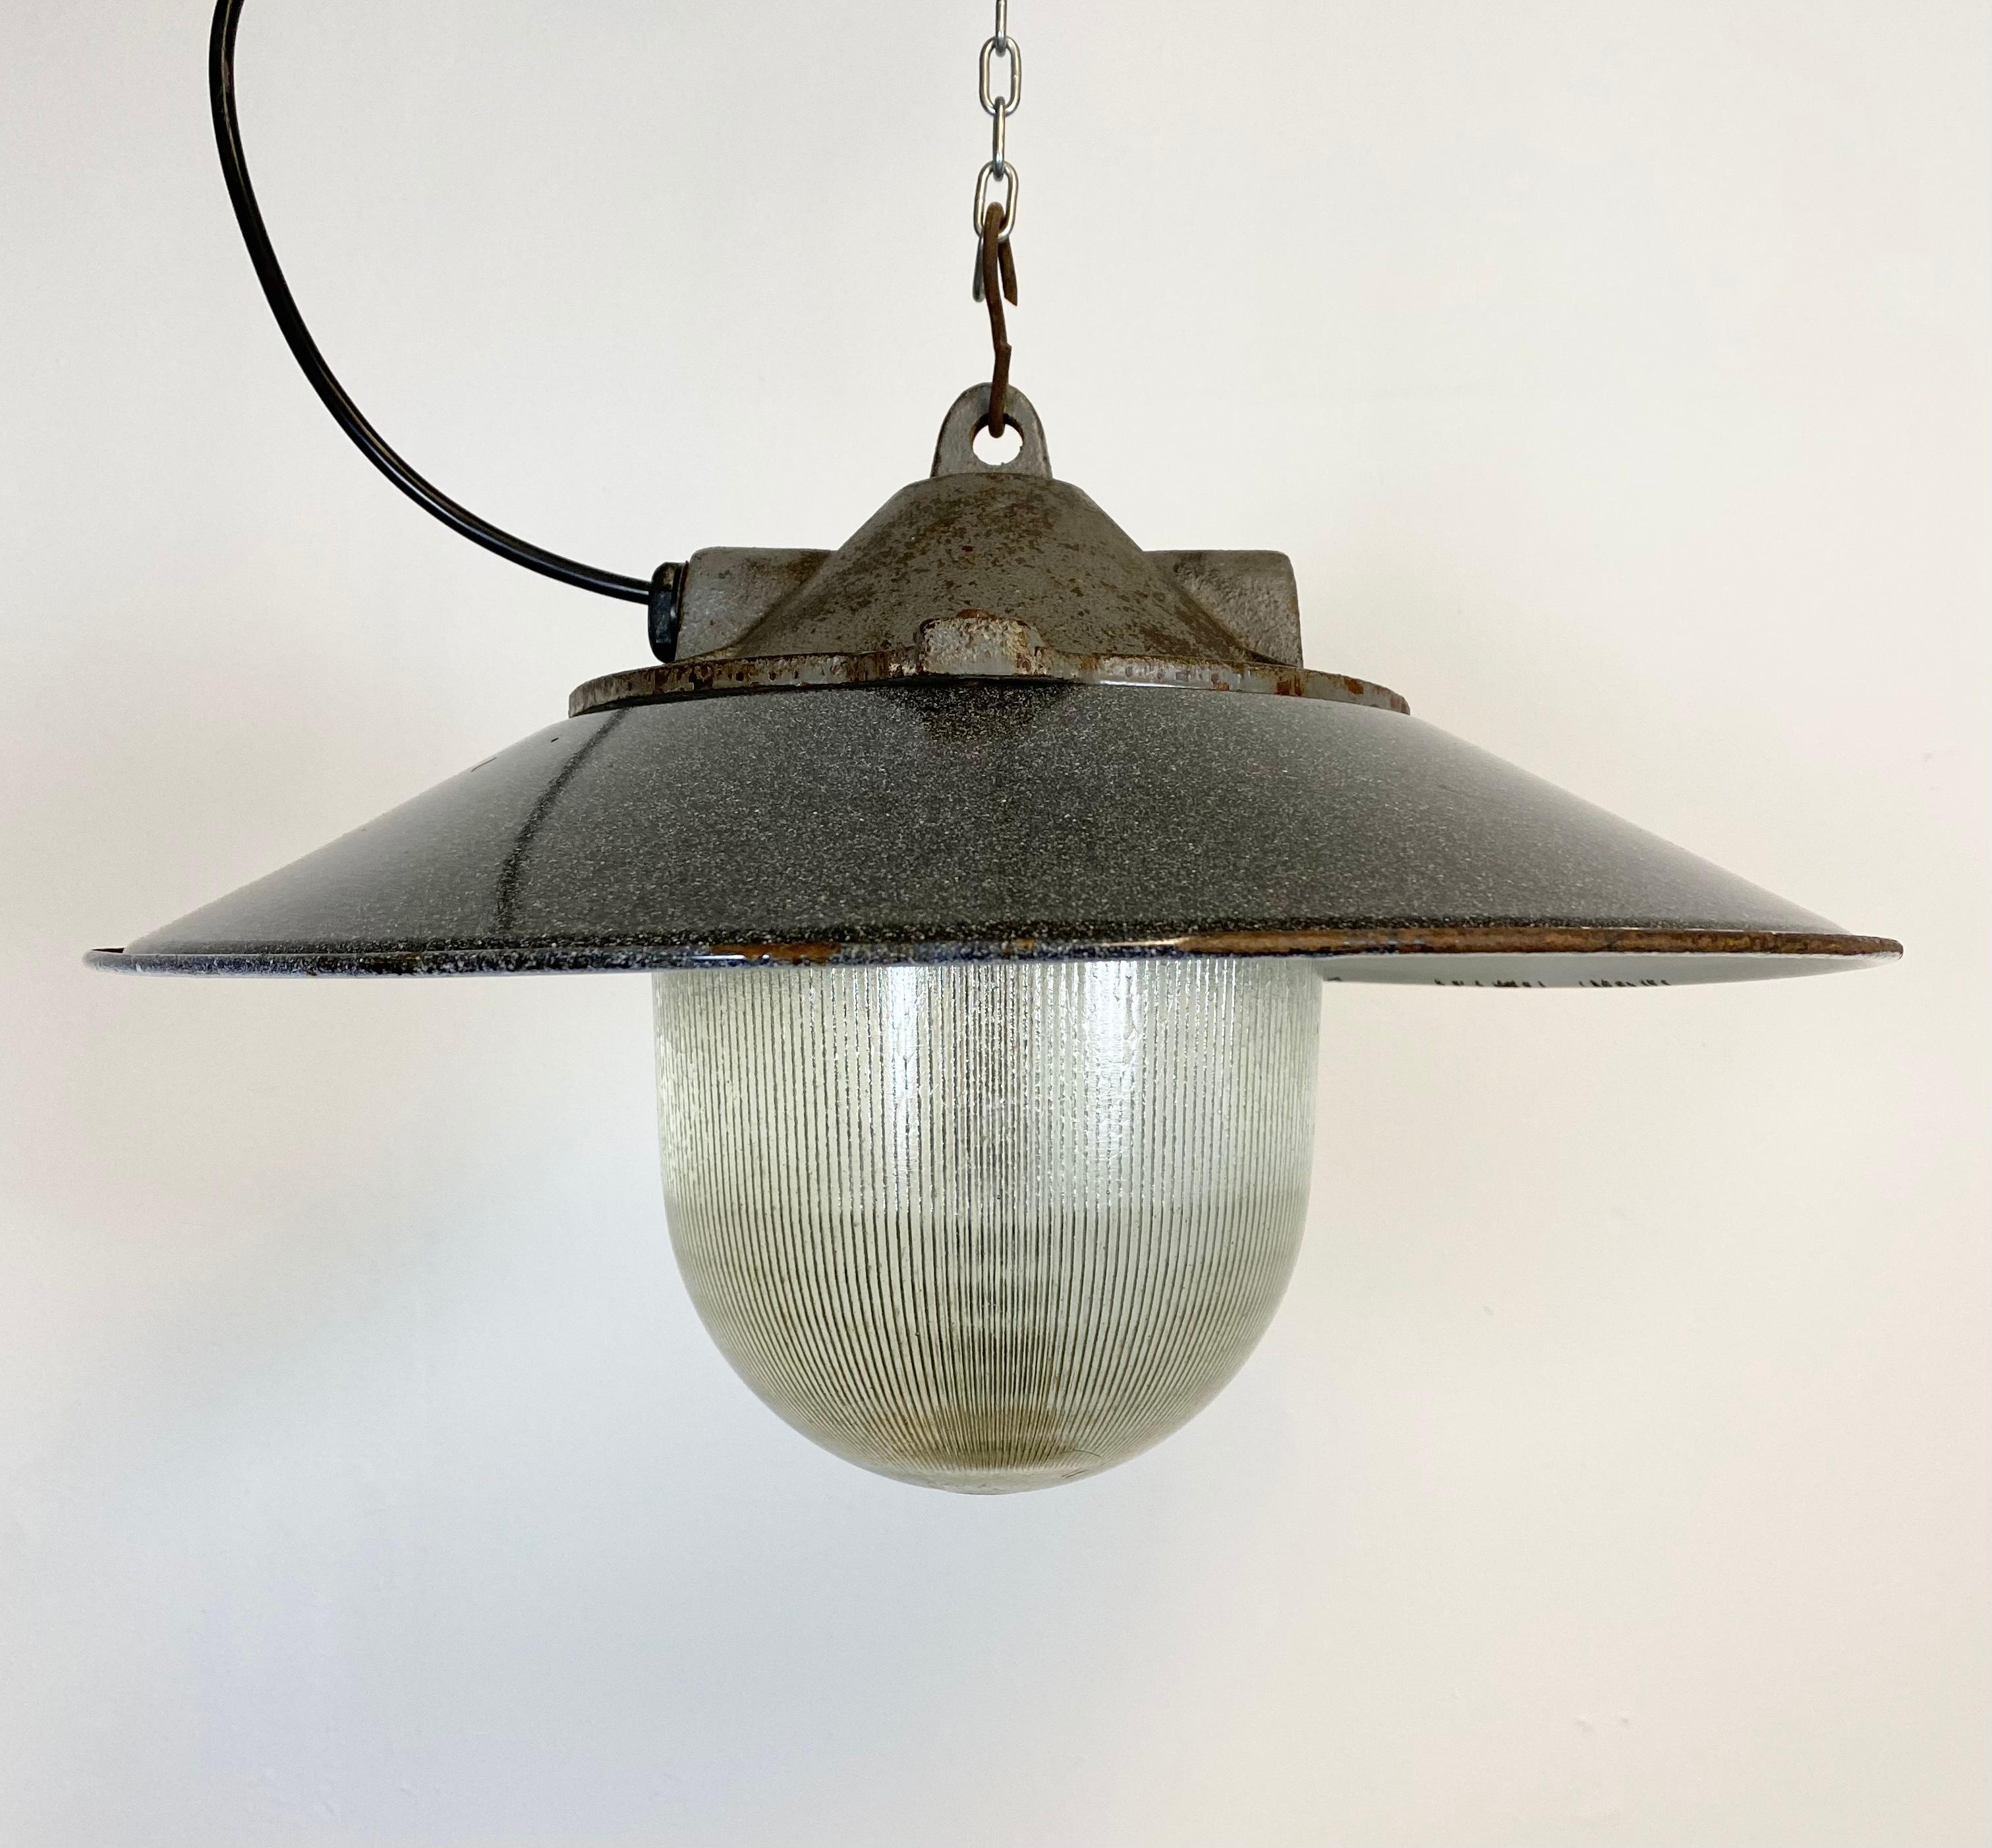 Industrial factory pendant lamp in cast iron made in former Czechoslovakia during the 1950s.It features a grey metal enamel shade with white interior. Striped glass. Porcelain socket for E 27 light bulbs. New wire. The weight of the lamp is 6.0 kg.